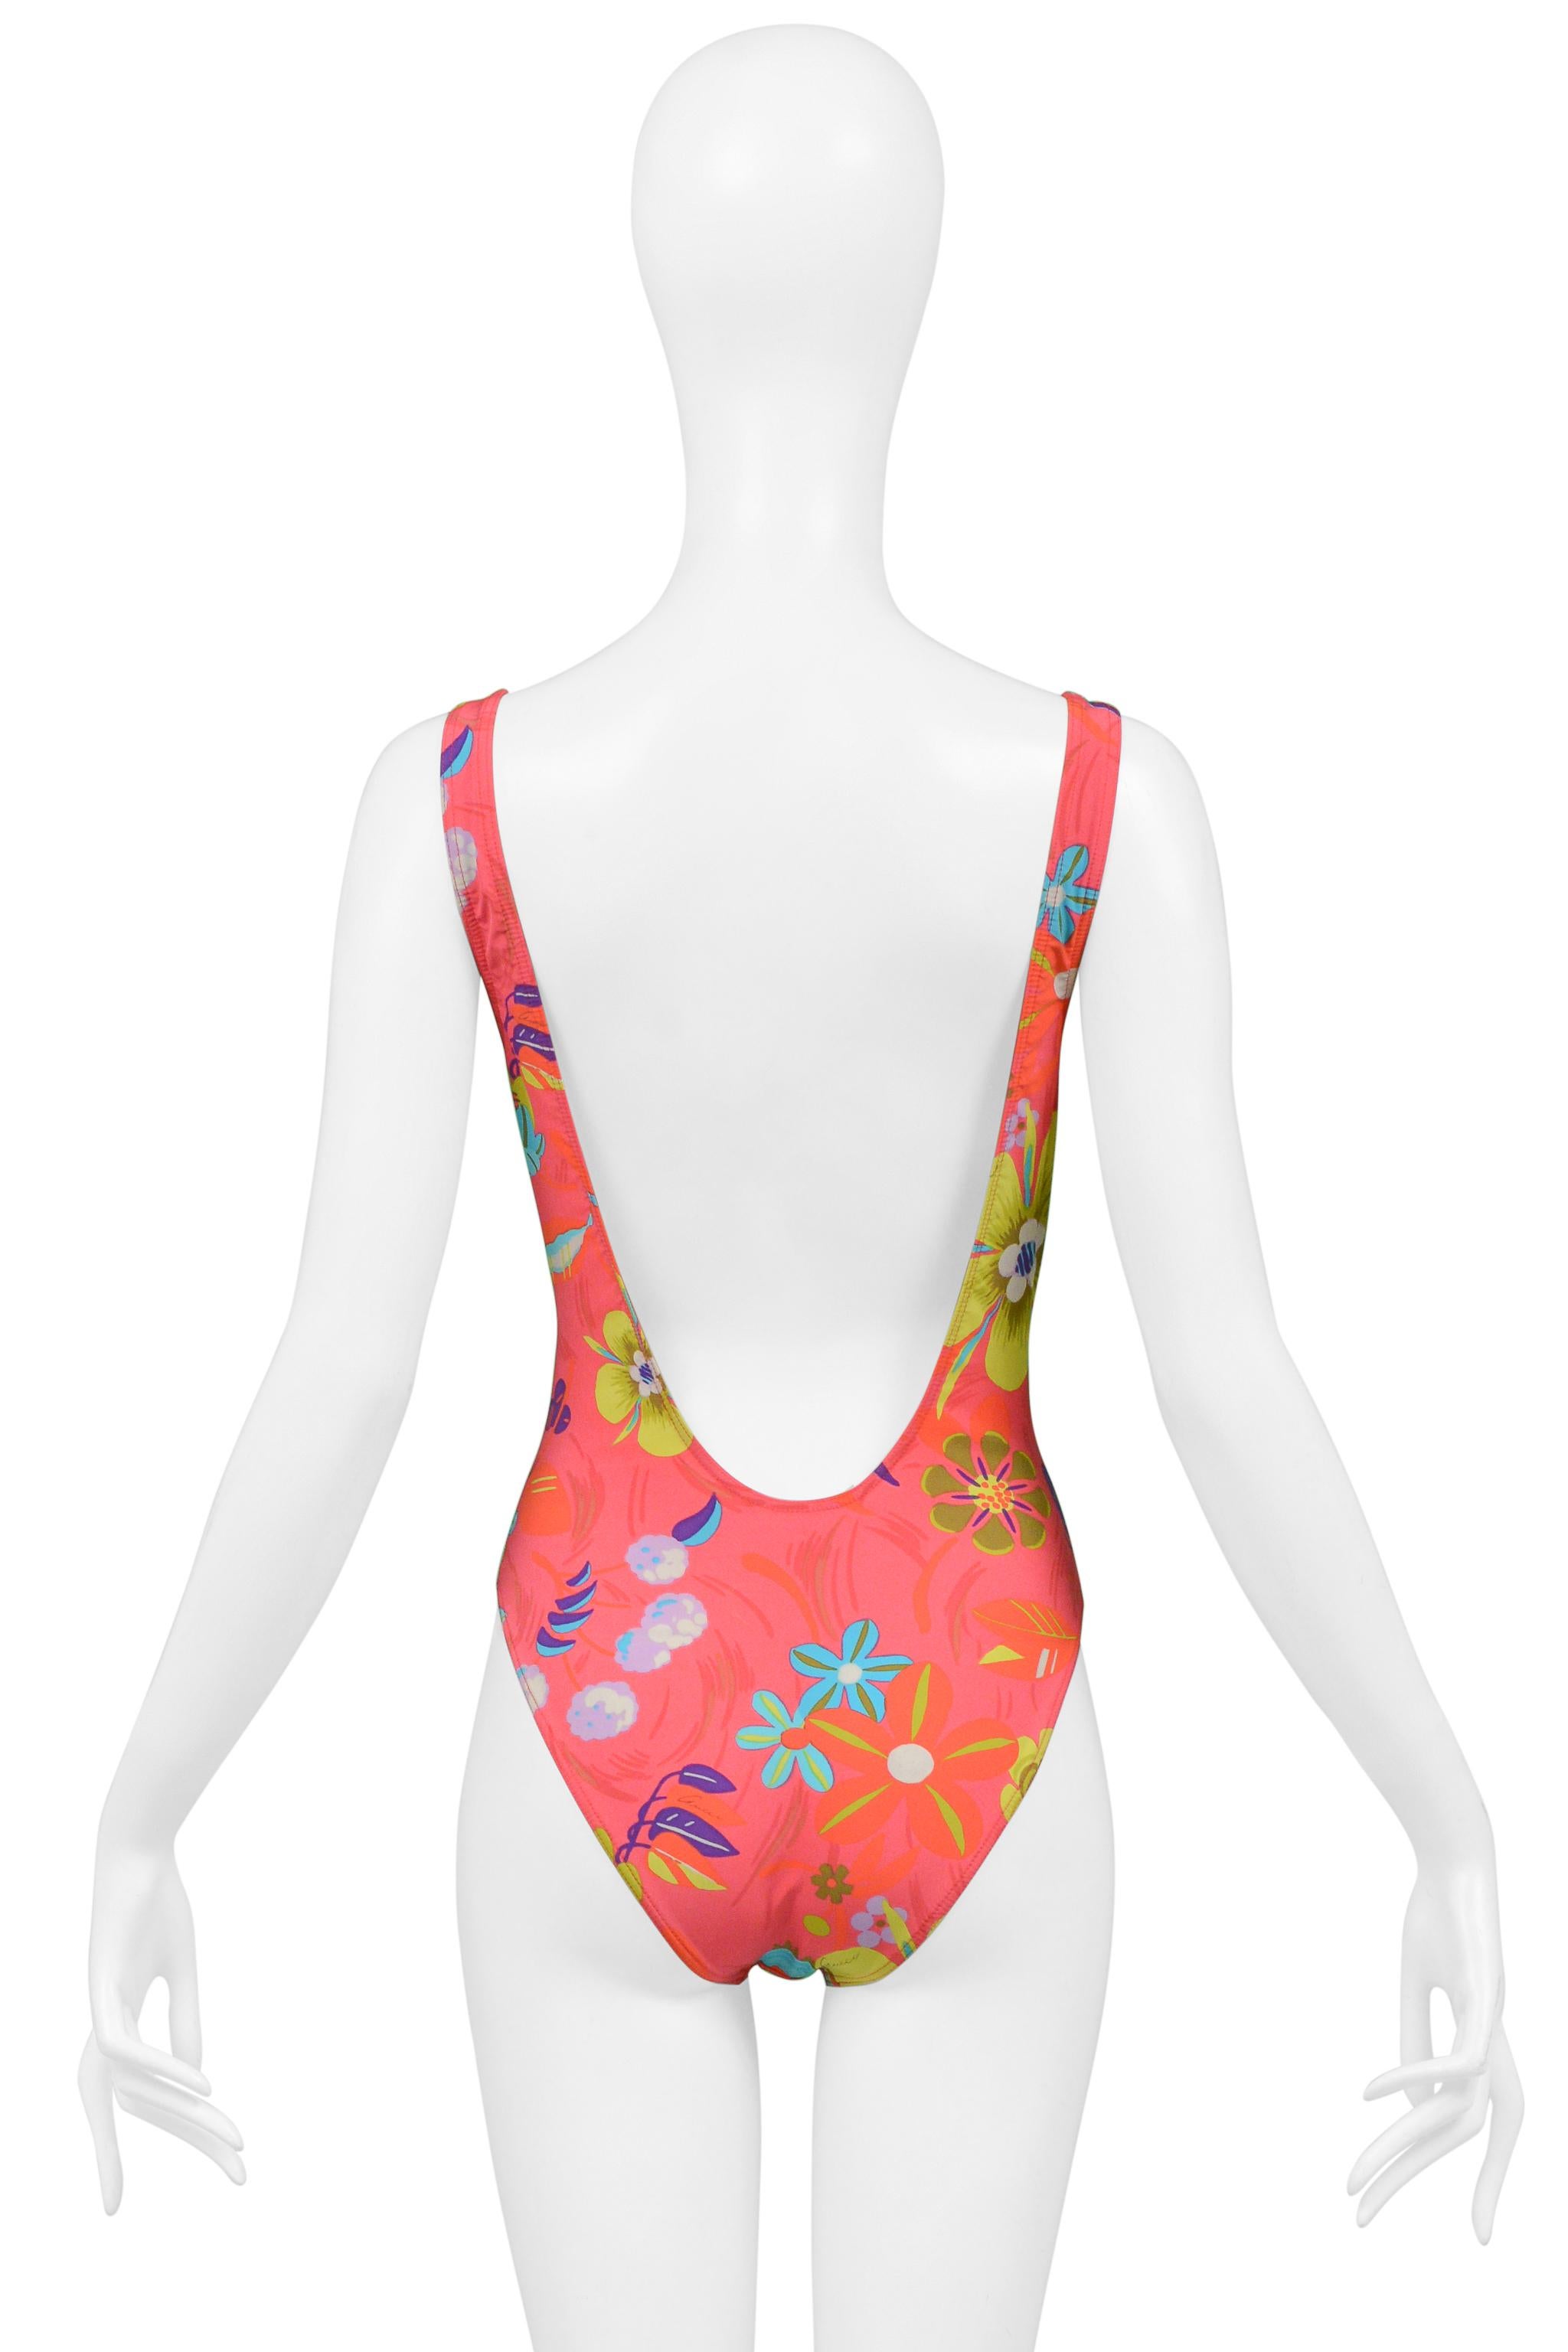 Gucci By Tom Ford Pink Floral Print One Piece Swimsuit 1999 1